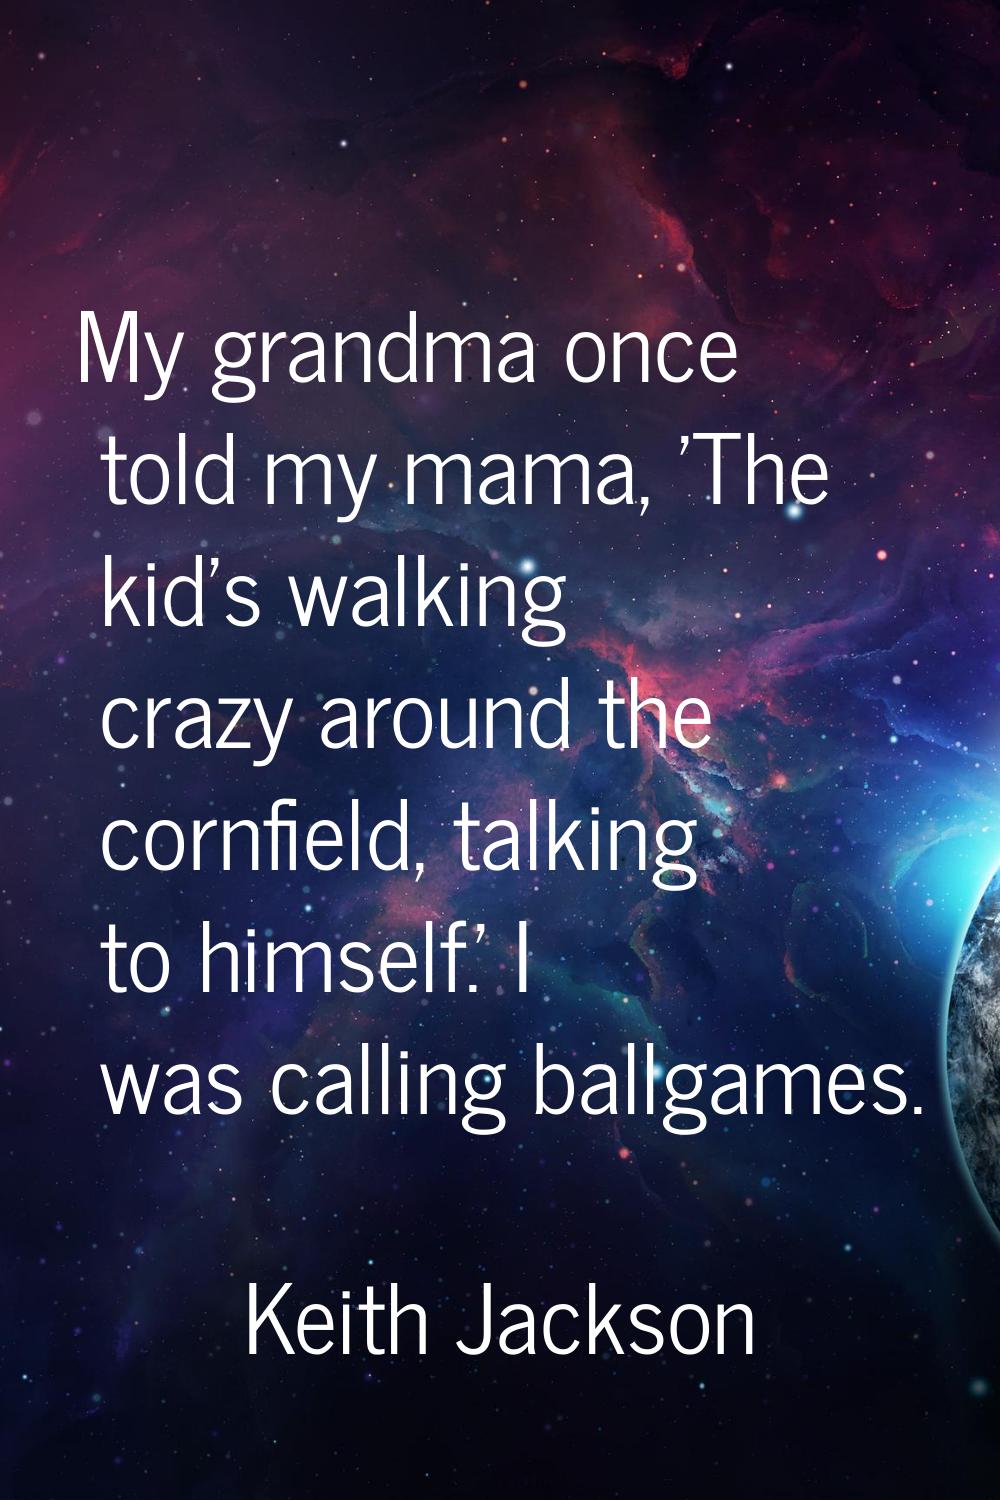 My grandma once told my mama, 'The kid's walking crazy around the cornfield, talking to himself.' I